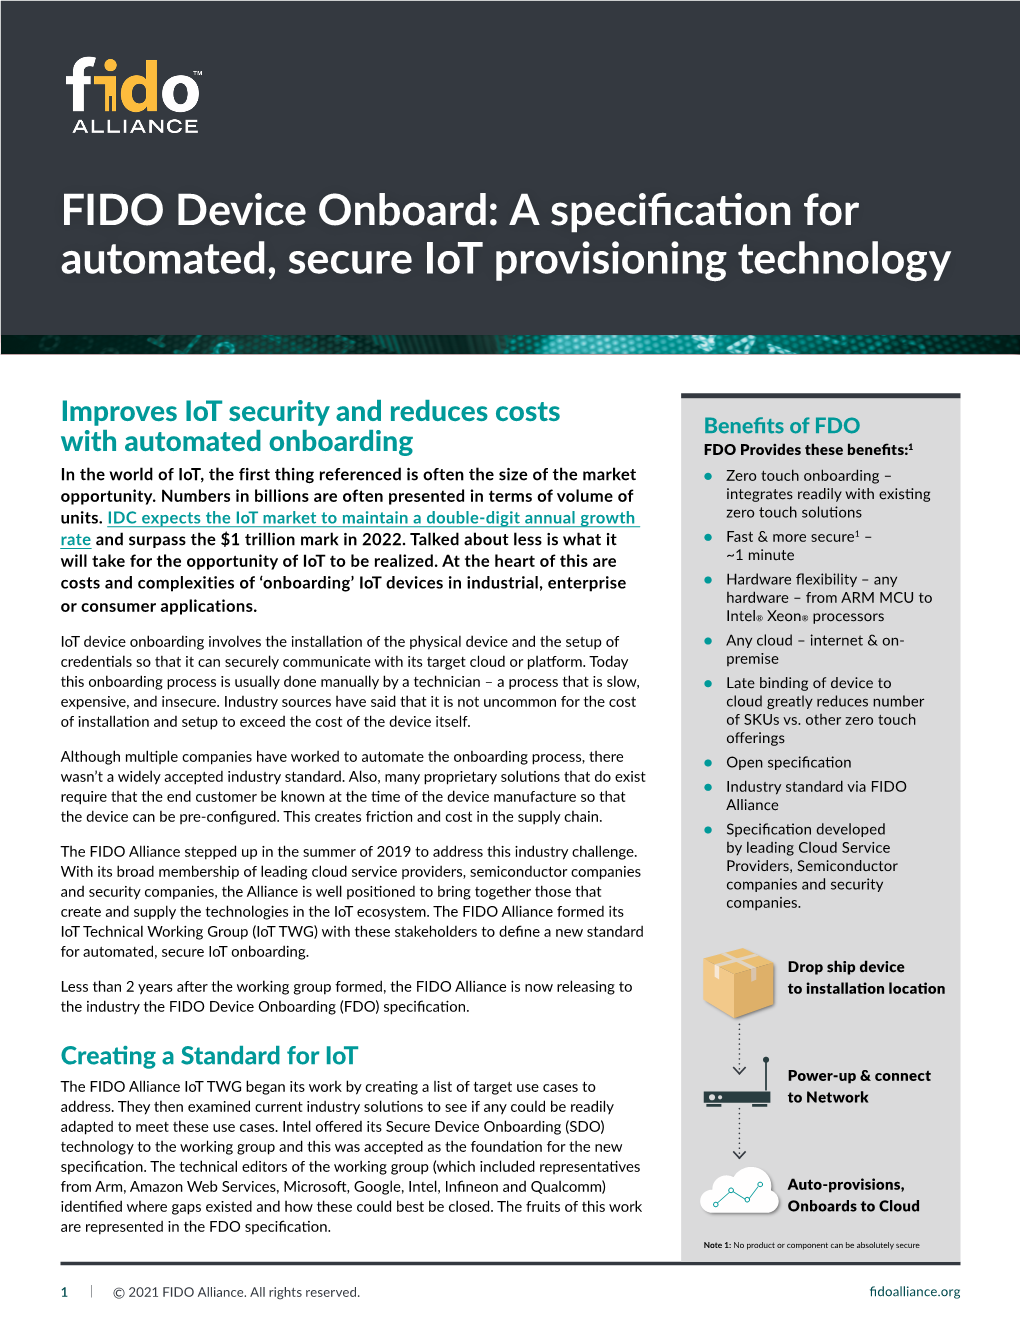 FIDO Device Onboard: a Specification for Automated, Secure Iot Provisioning Technology